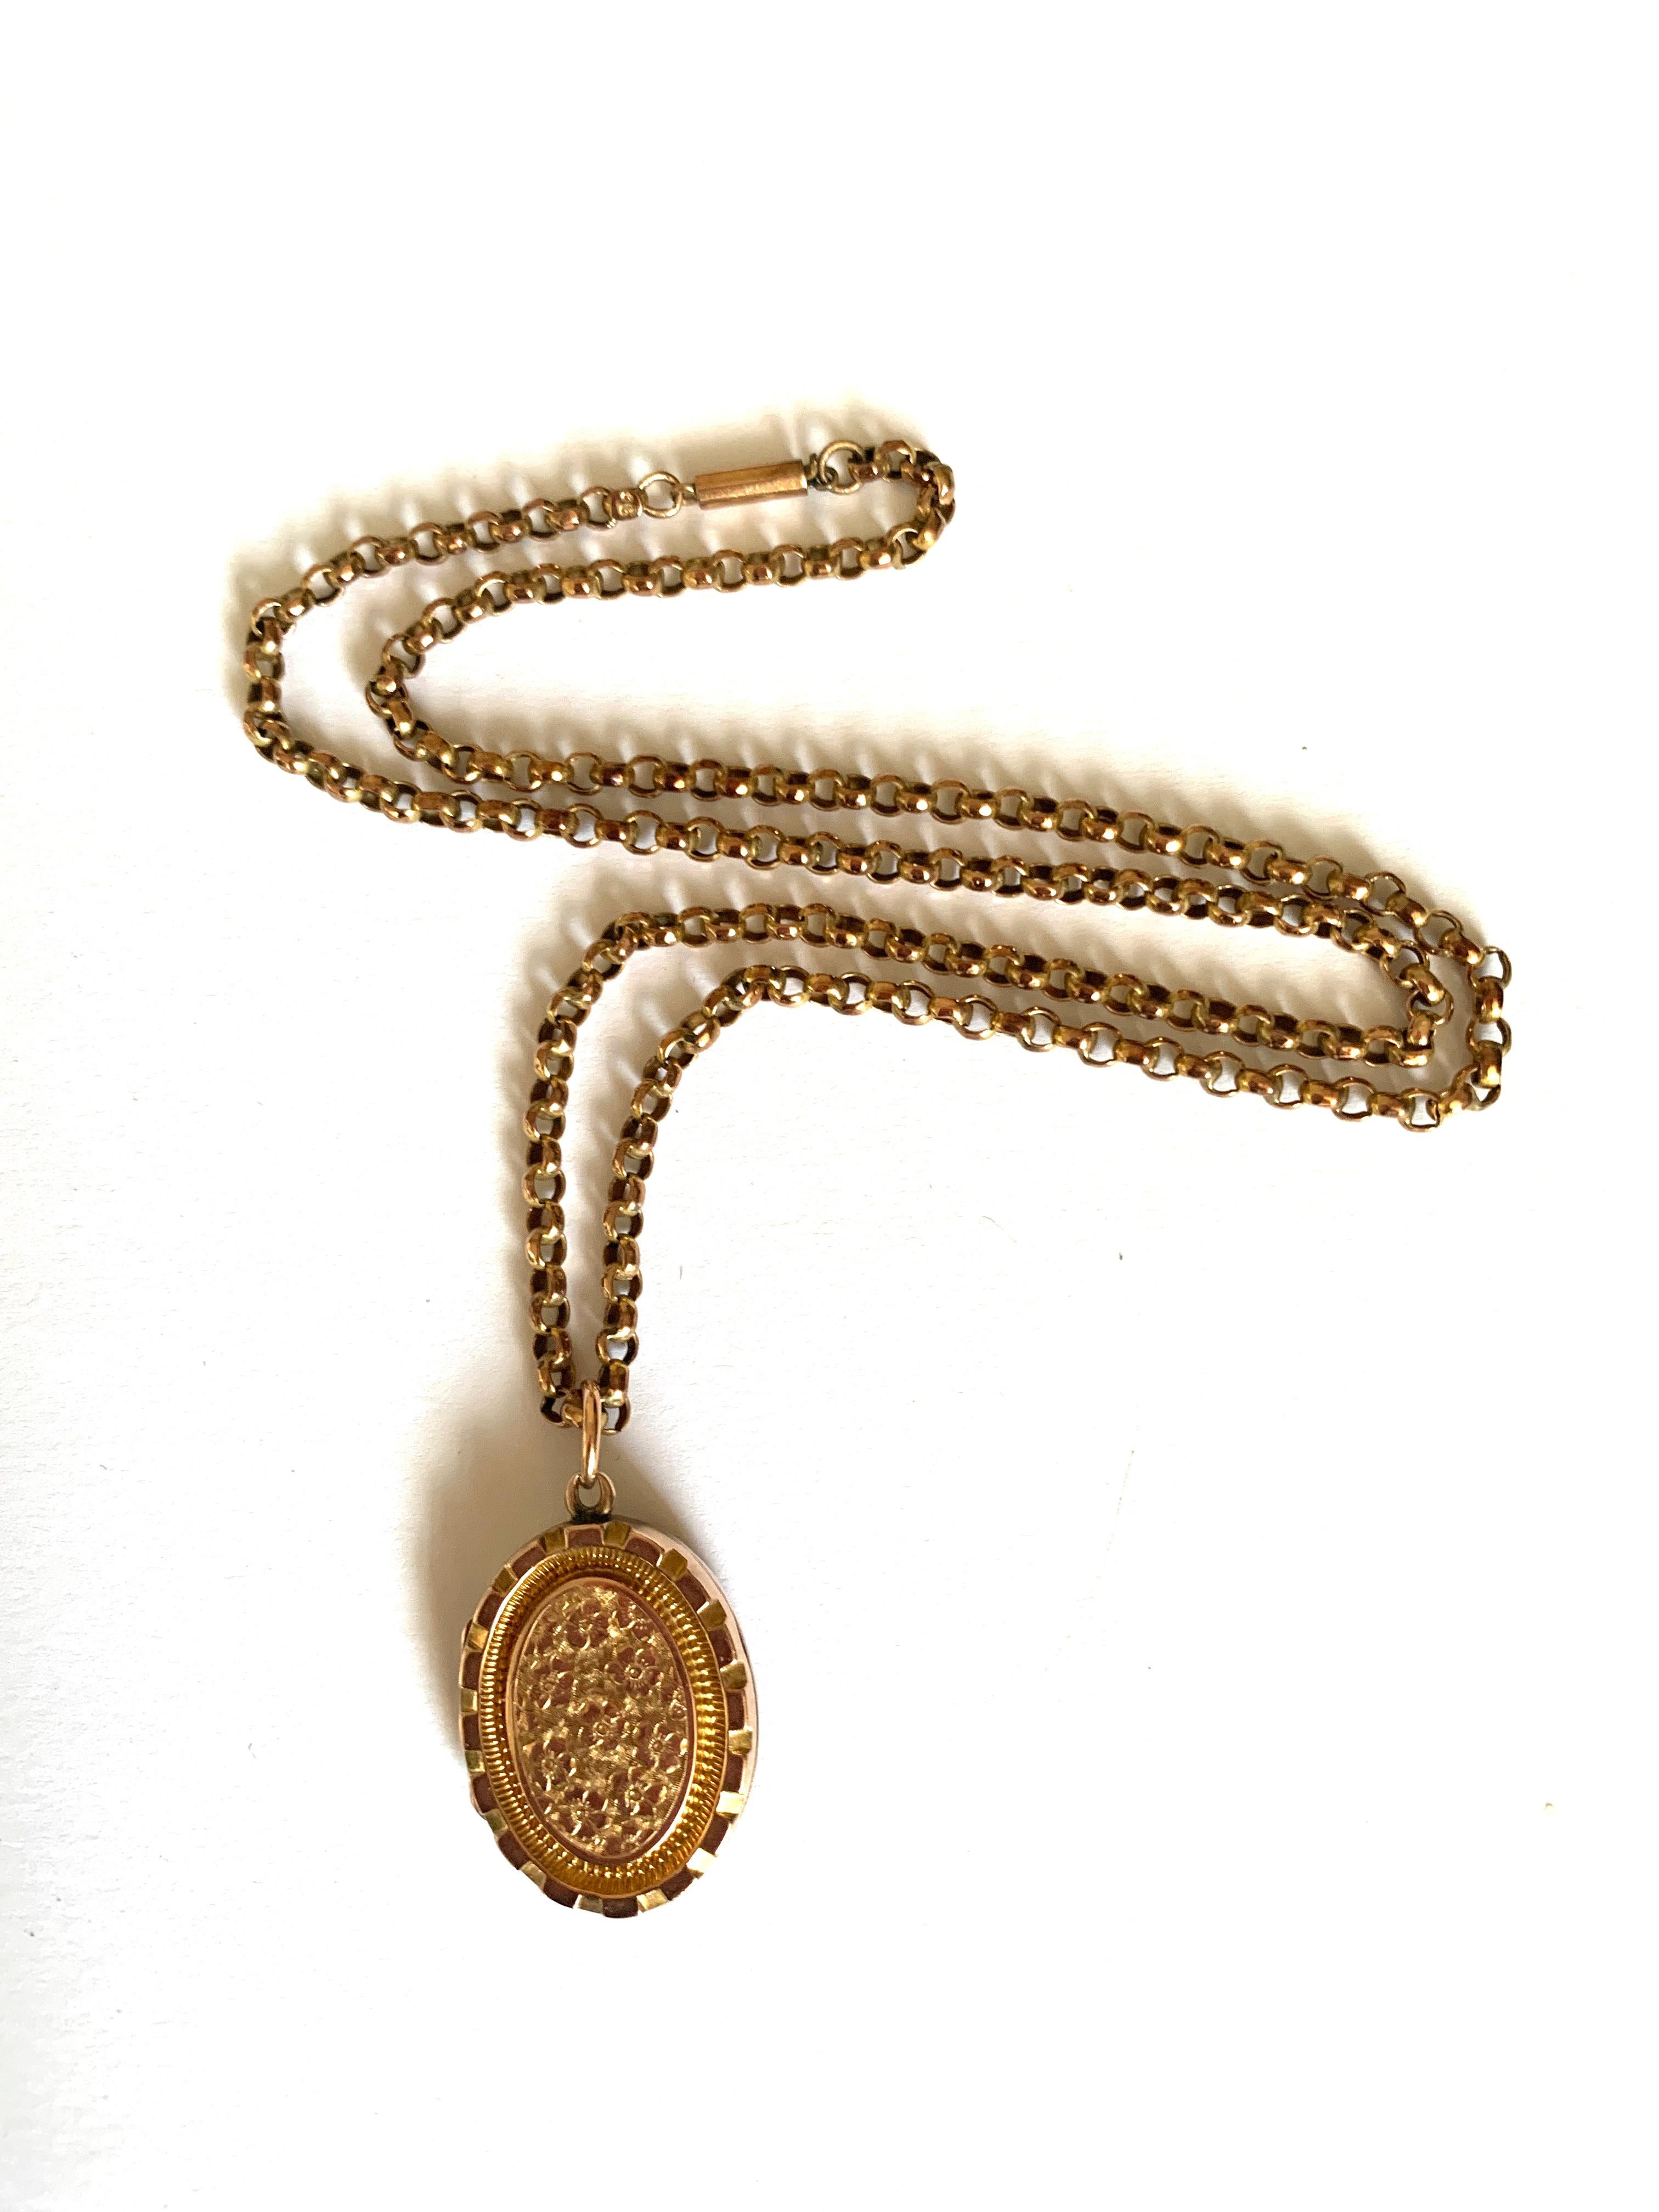 Antique  Early 20th Century
9ct Gold Locket
and 9ct Gold Chain.

Locket Fully hallmarked ( Date Letter Faded)
Chain has a 9c Plaque.

Length of chain - 20